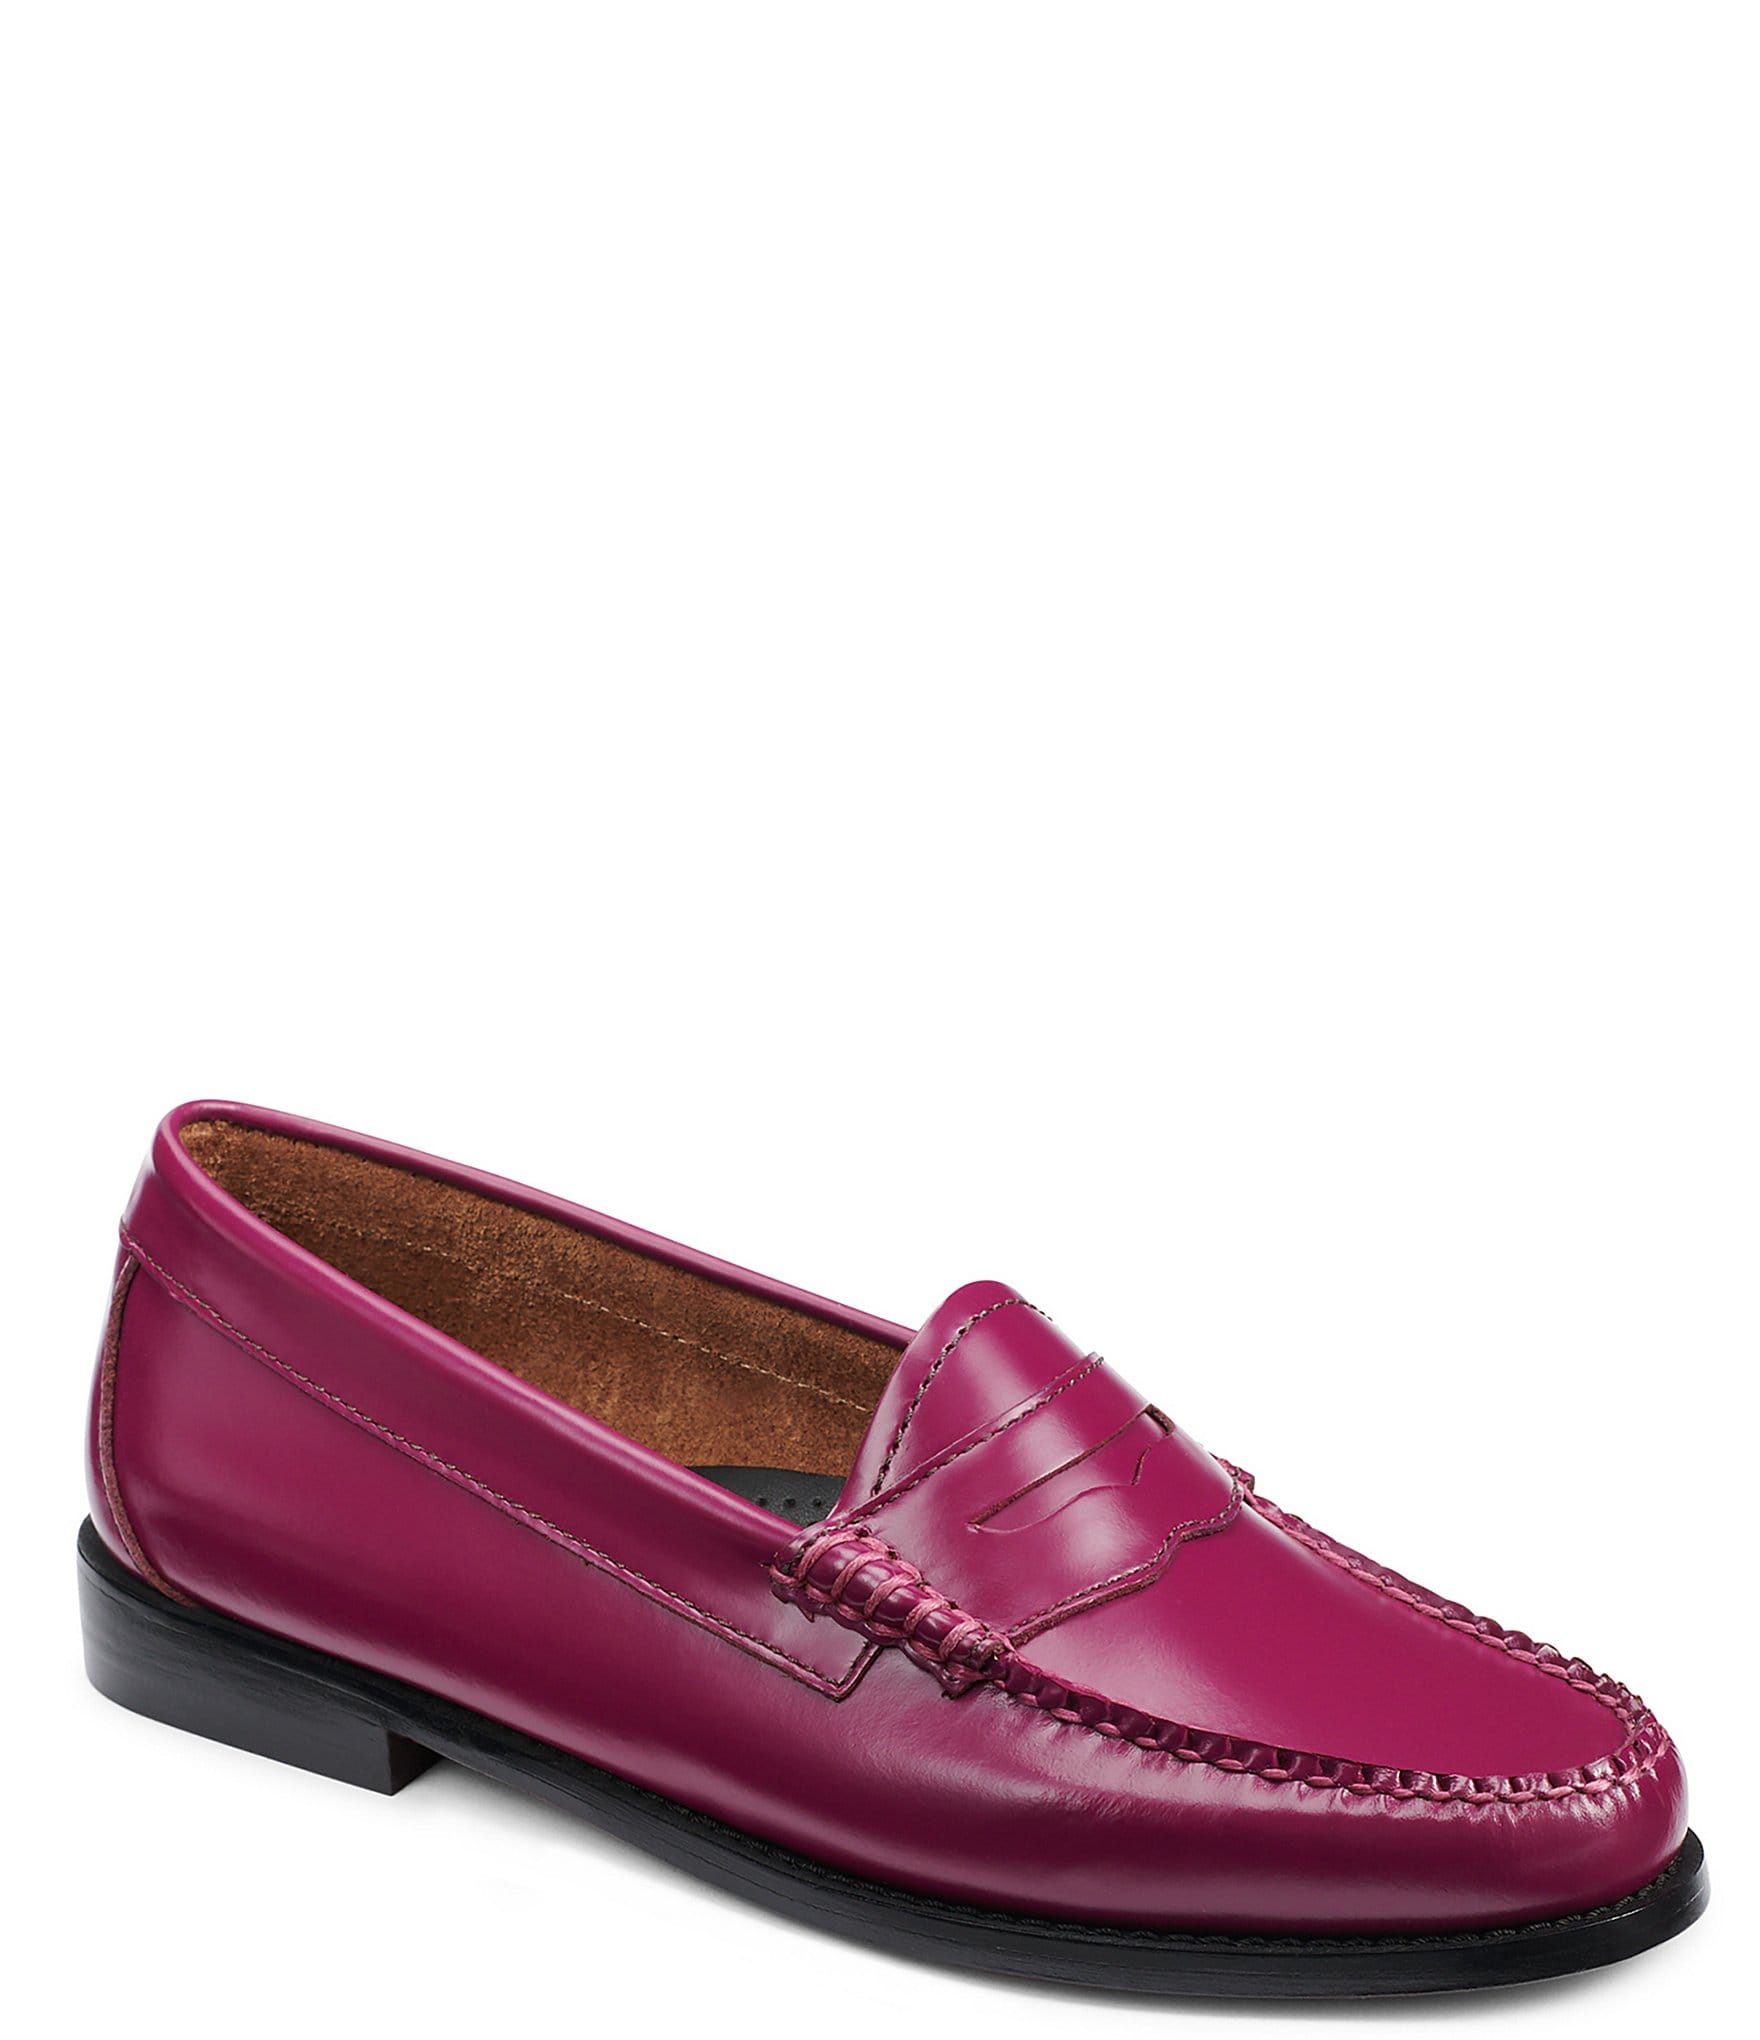 G.H. Women's Candy Weejun Leather Penny Loafers